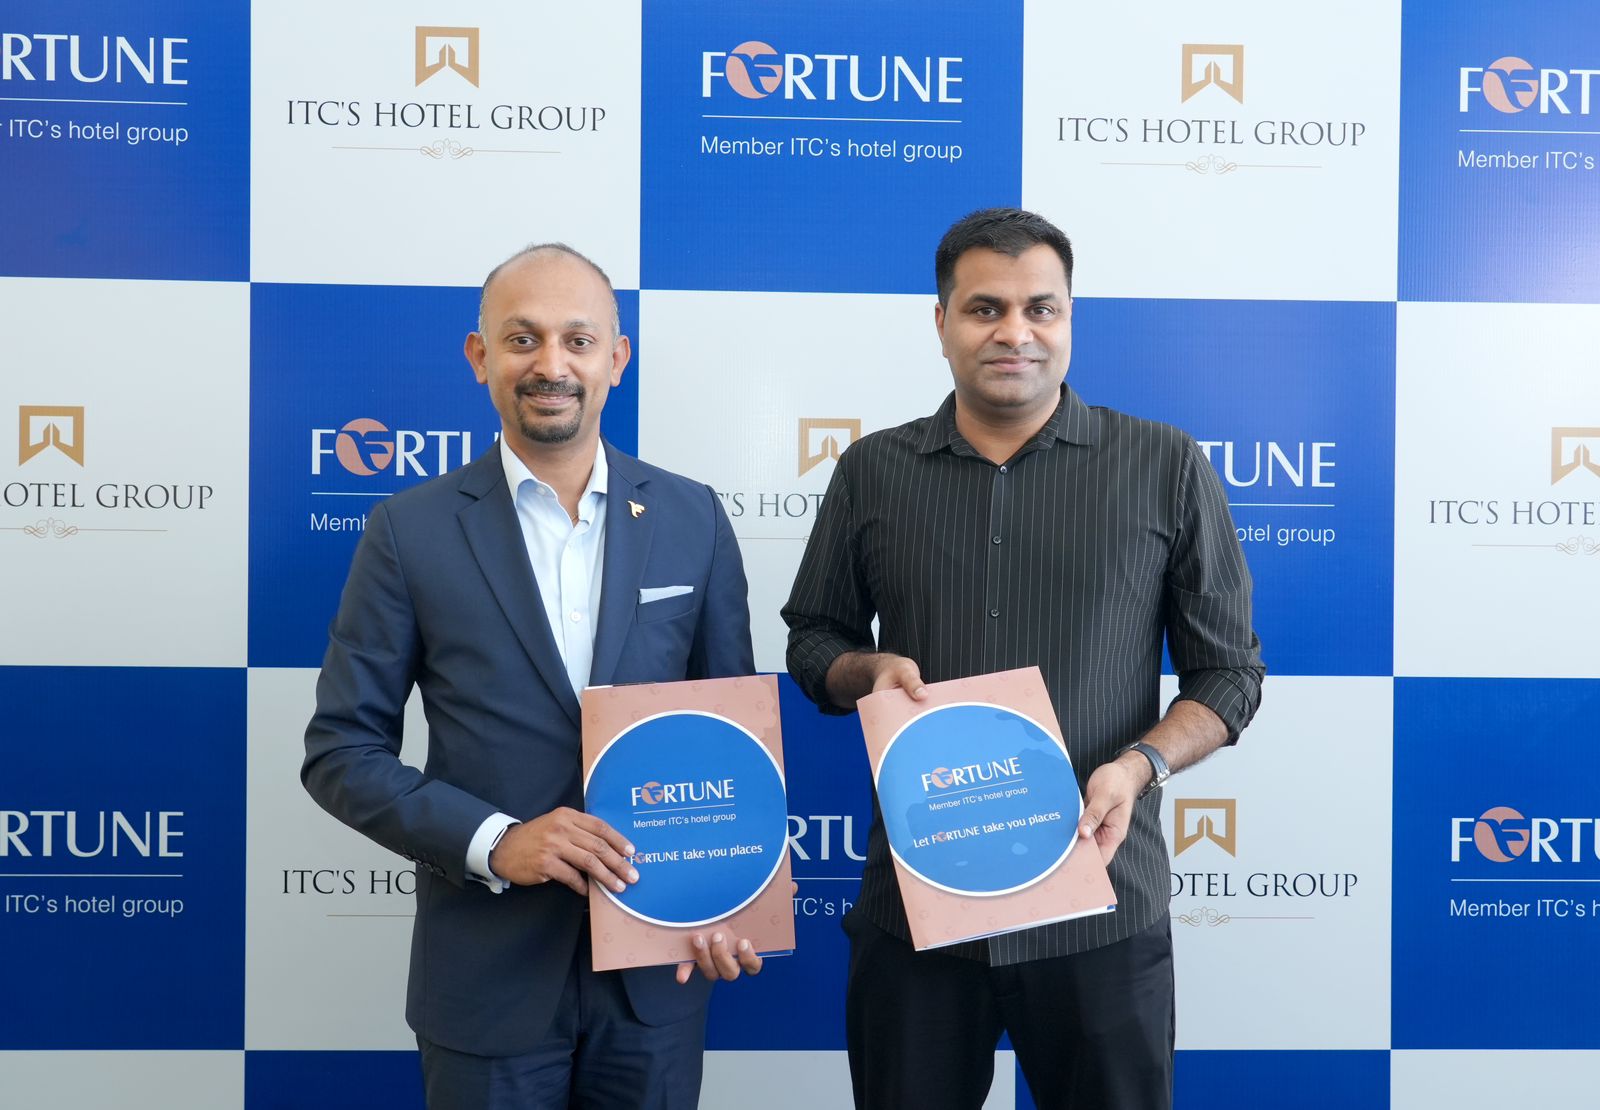 Fortune Hotels signs agreement to operate two hotels in Kochi